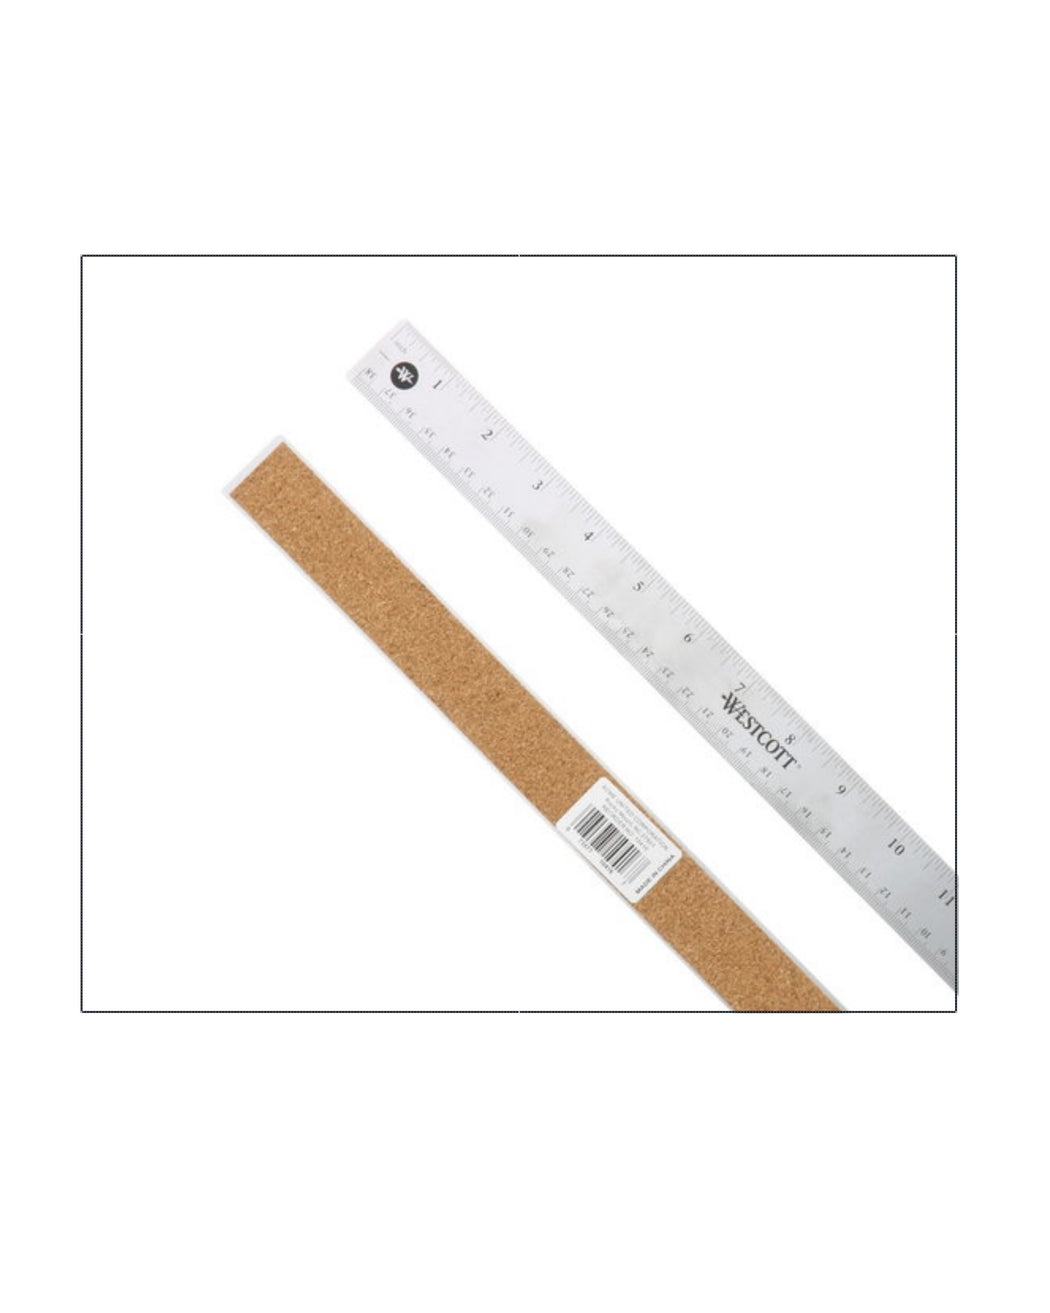 Wooden Ruler with Metal Edge, 18" - Zipper and Thread